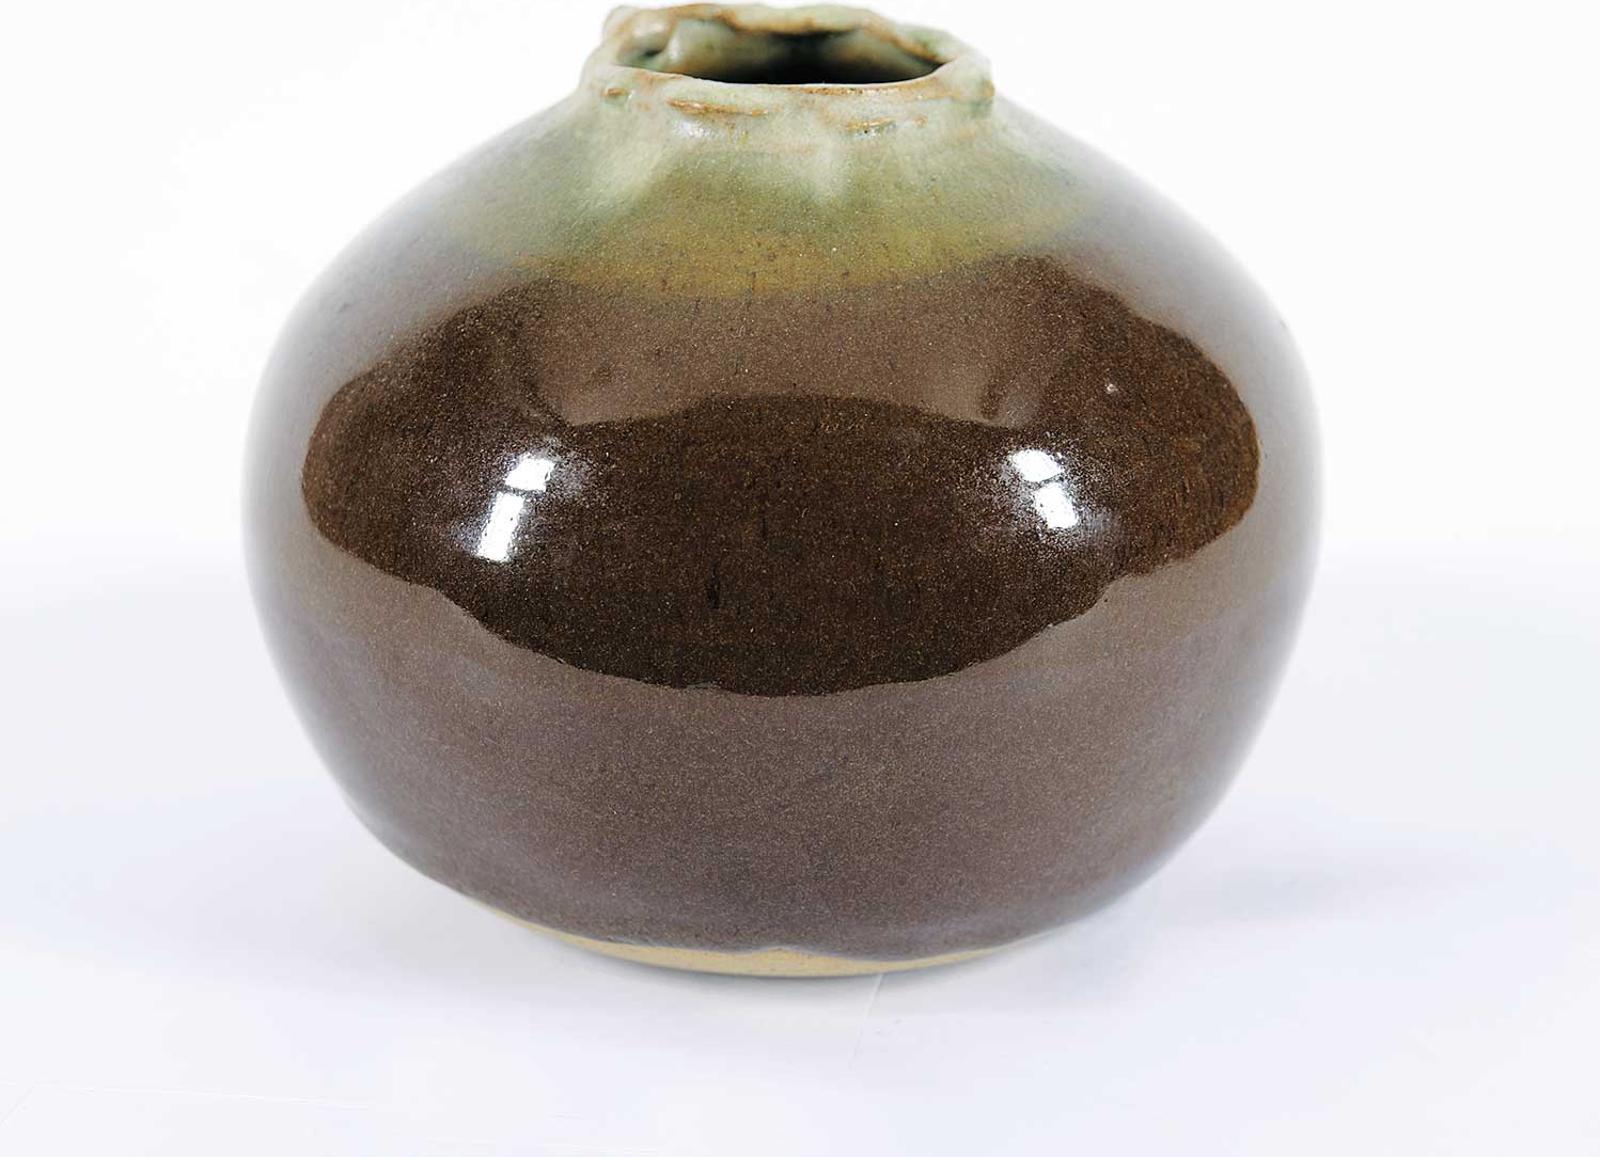 British Columbia School (1810) - Untitled - Brown Pot with Textured Opening